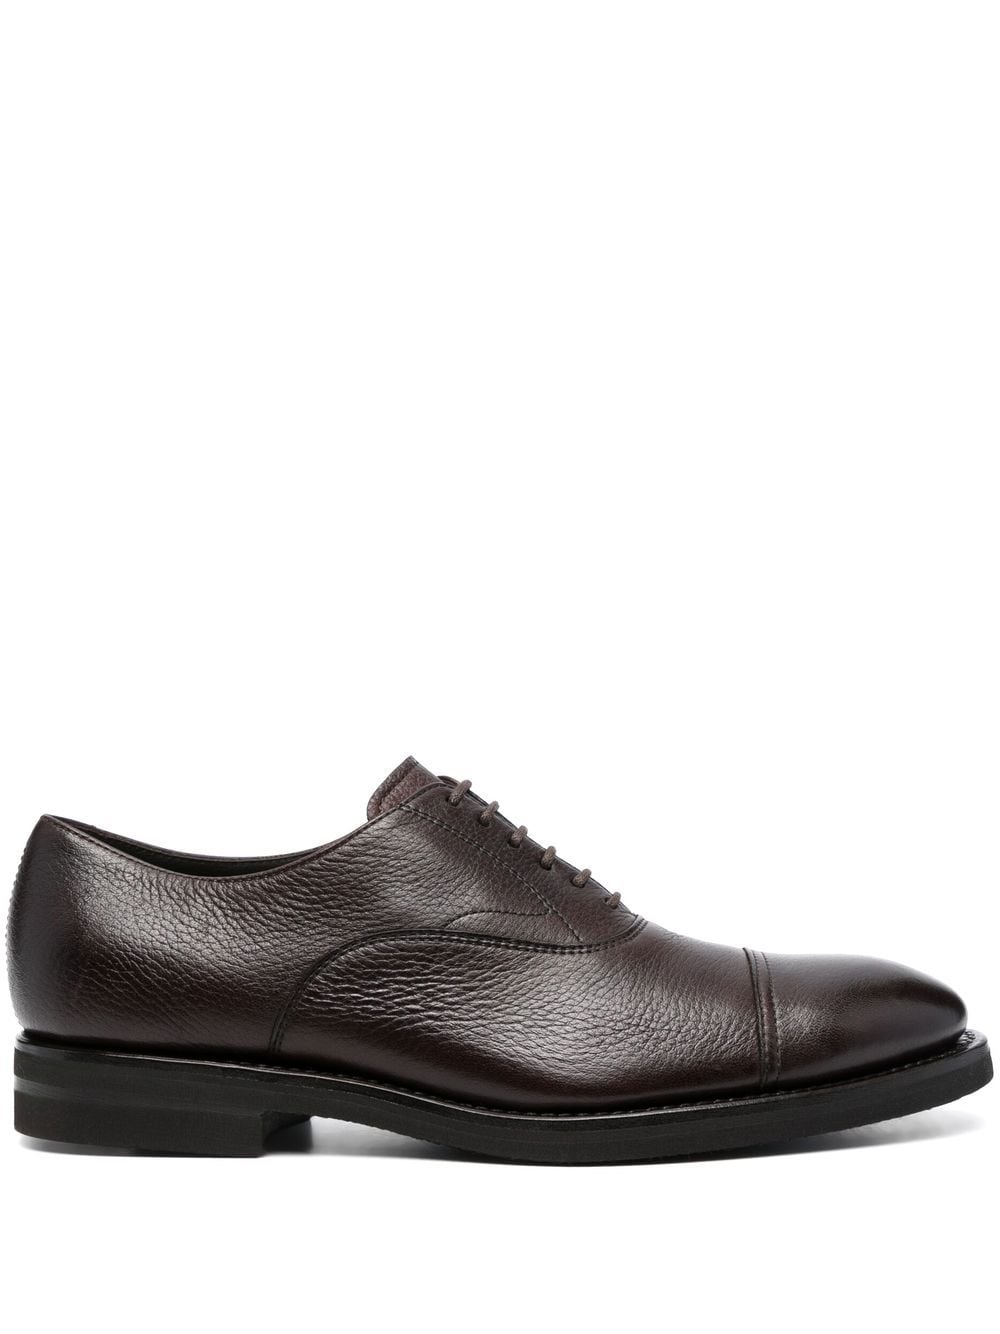 Henderson Baracco lace-up leather derby shoes - Brown von Henderson Baracco